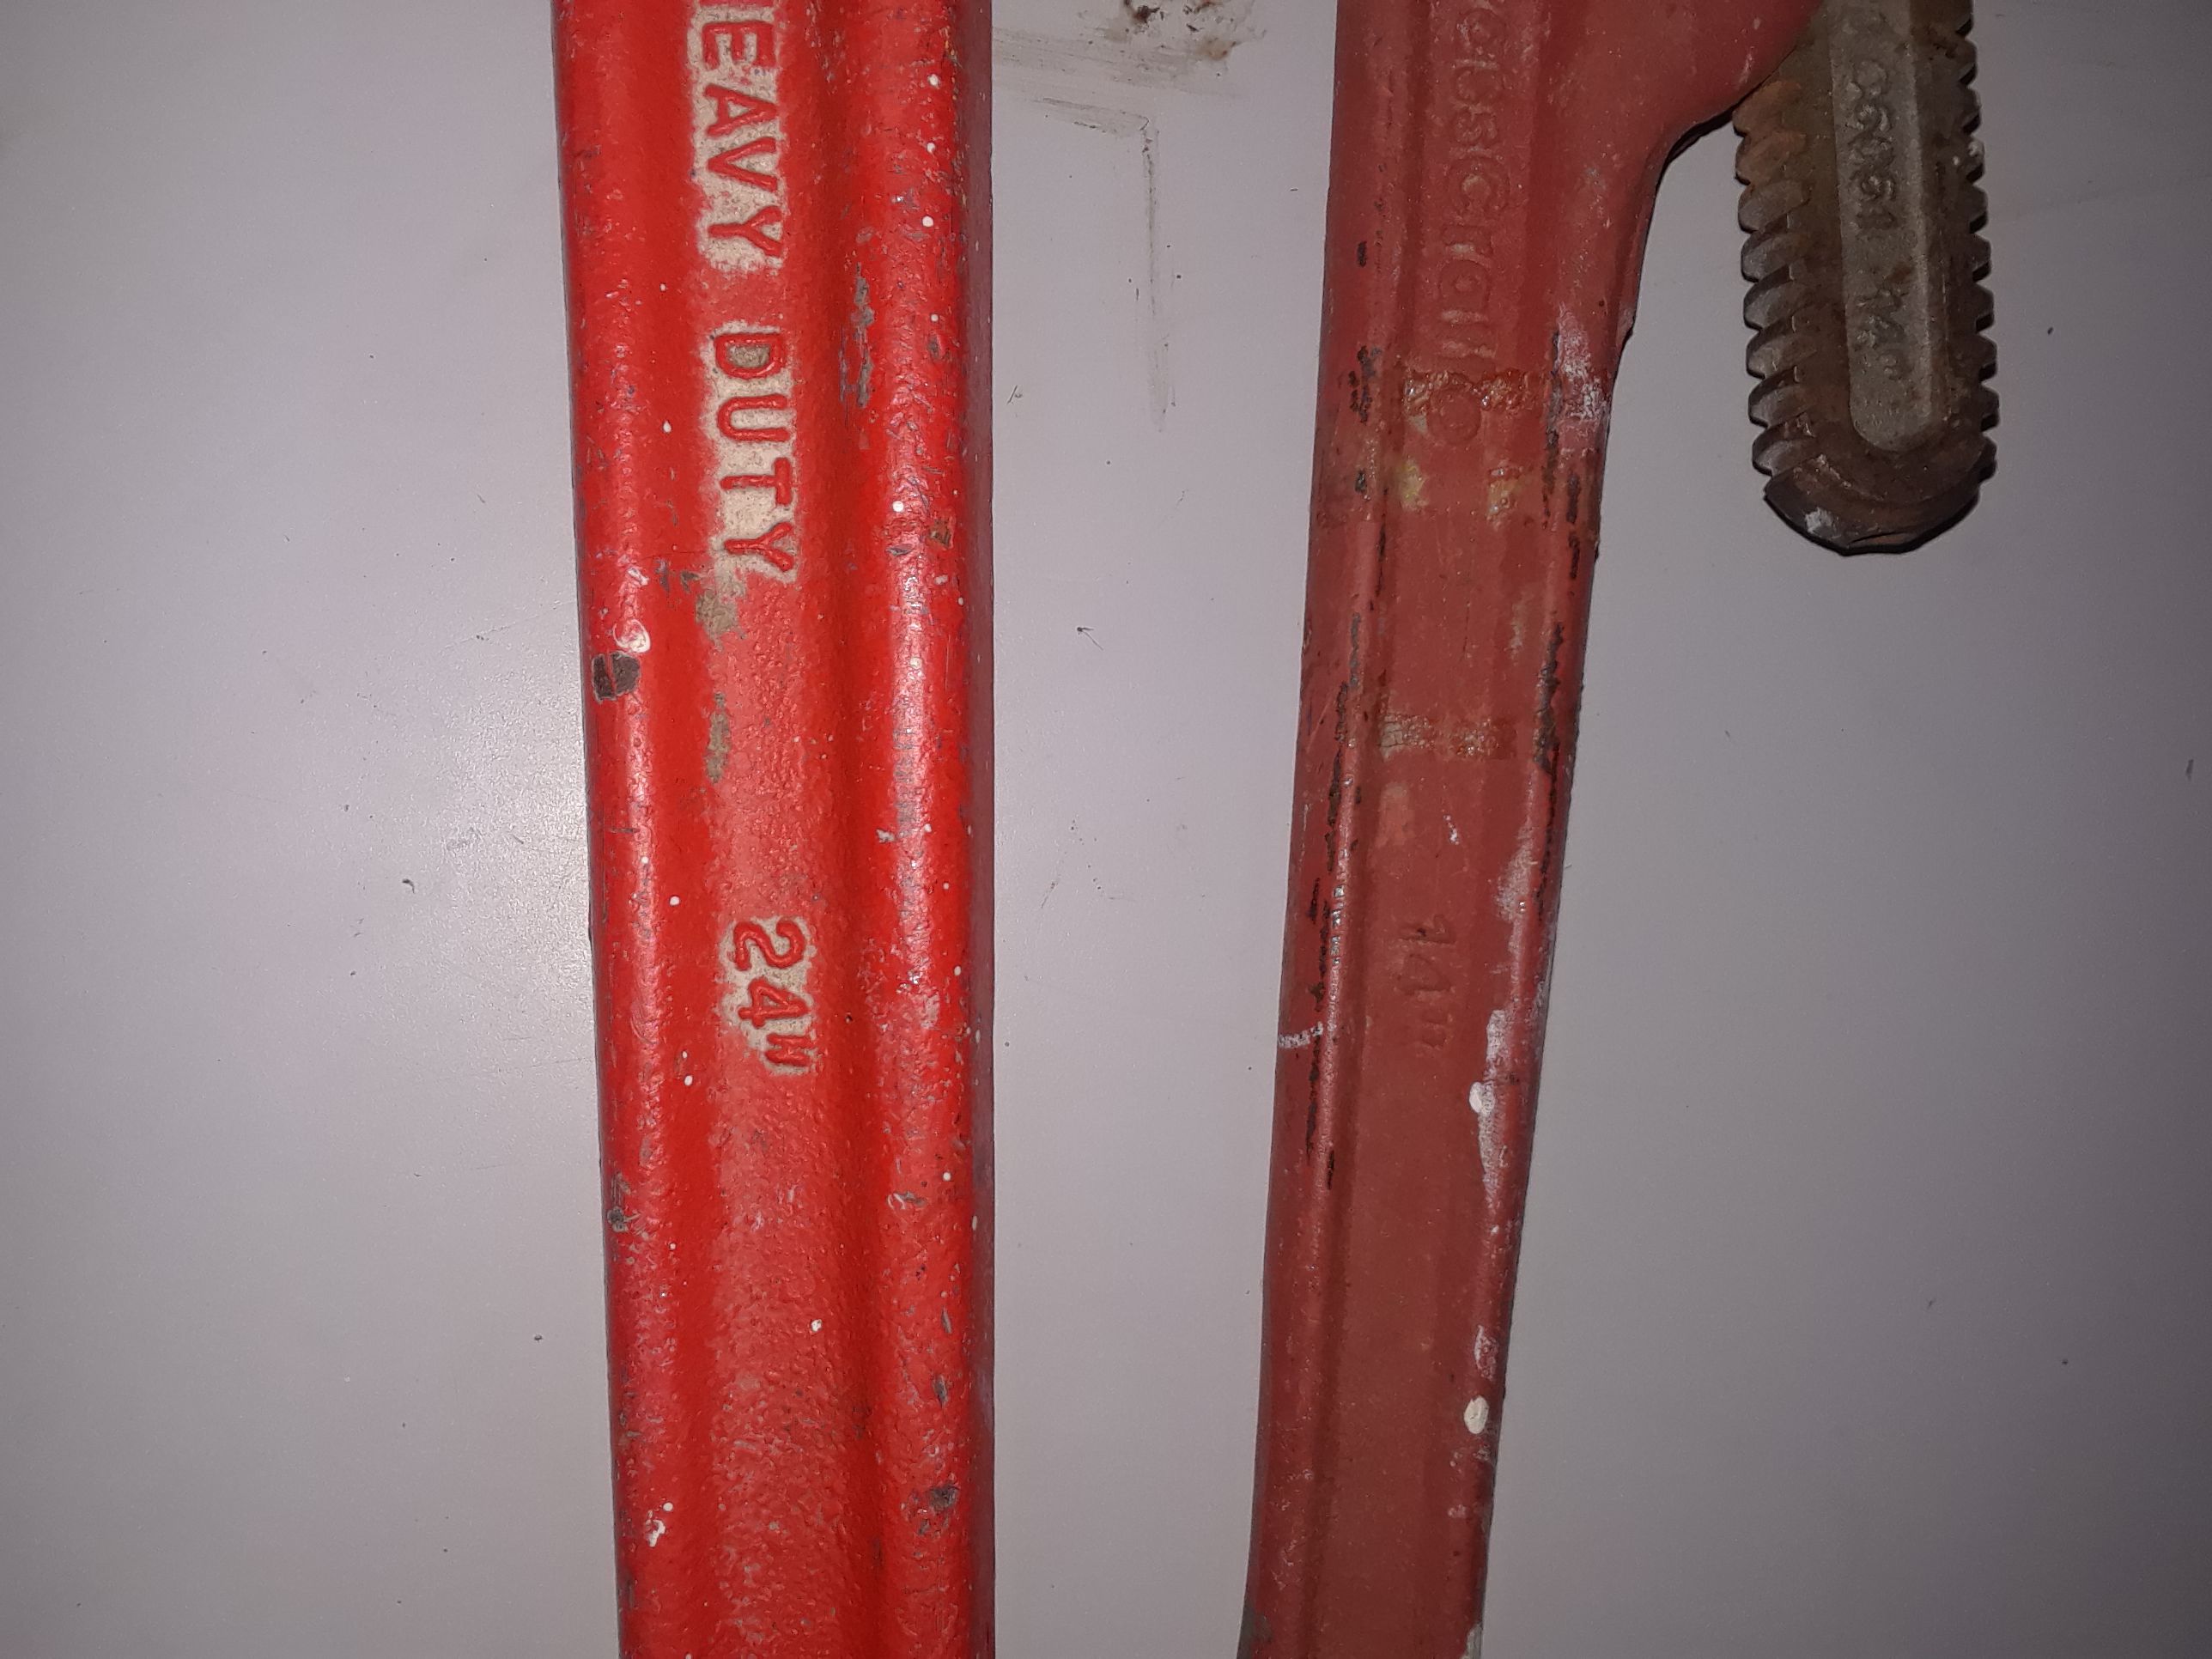 Pipe wrench - 3 of them